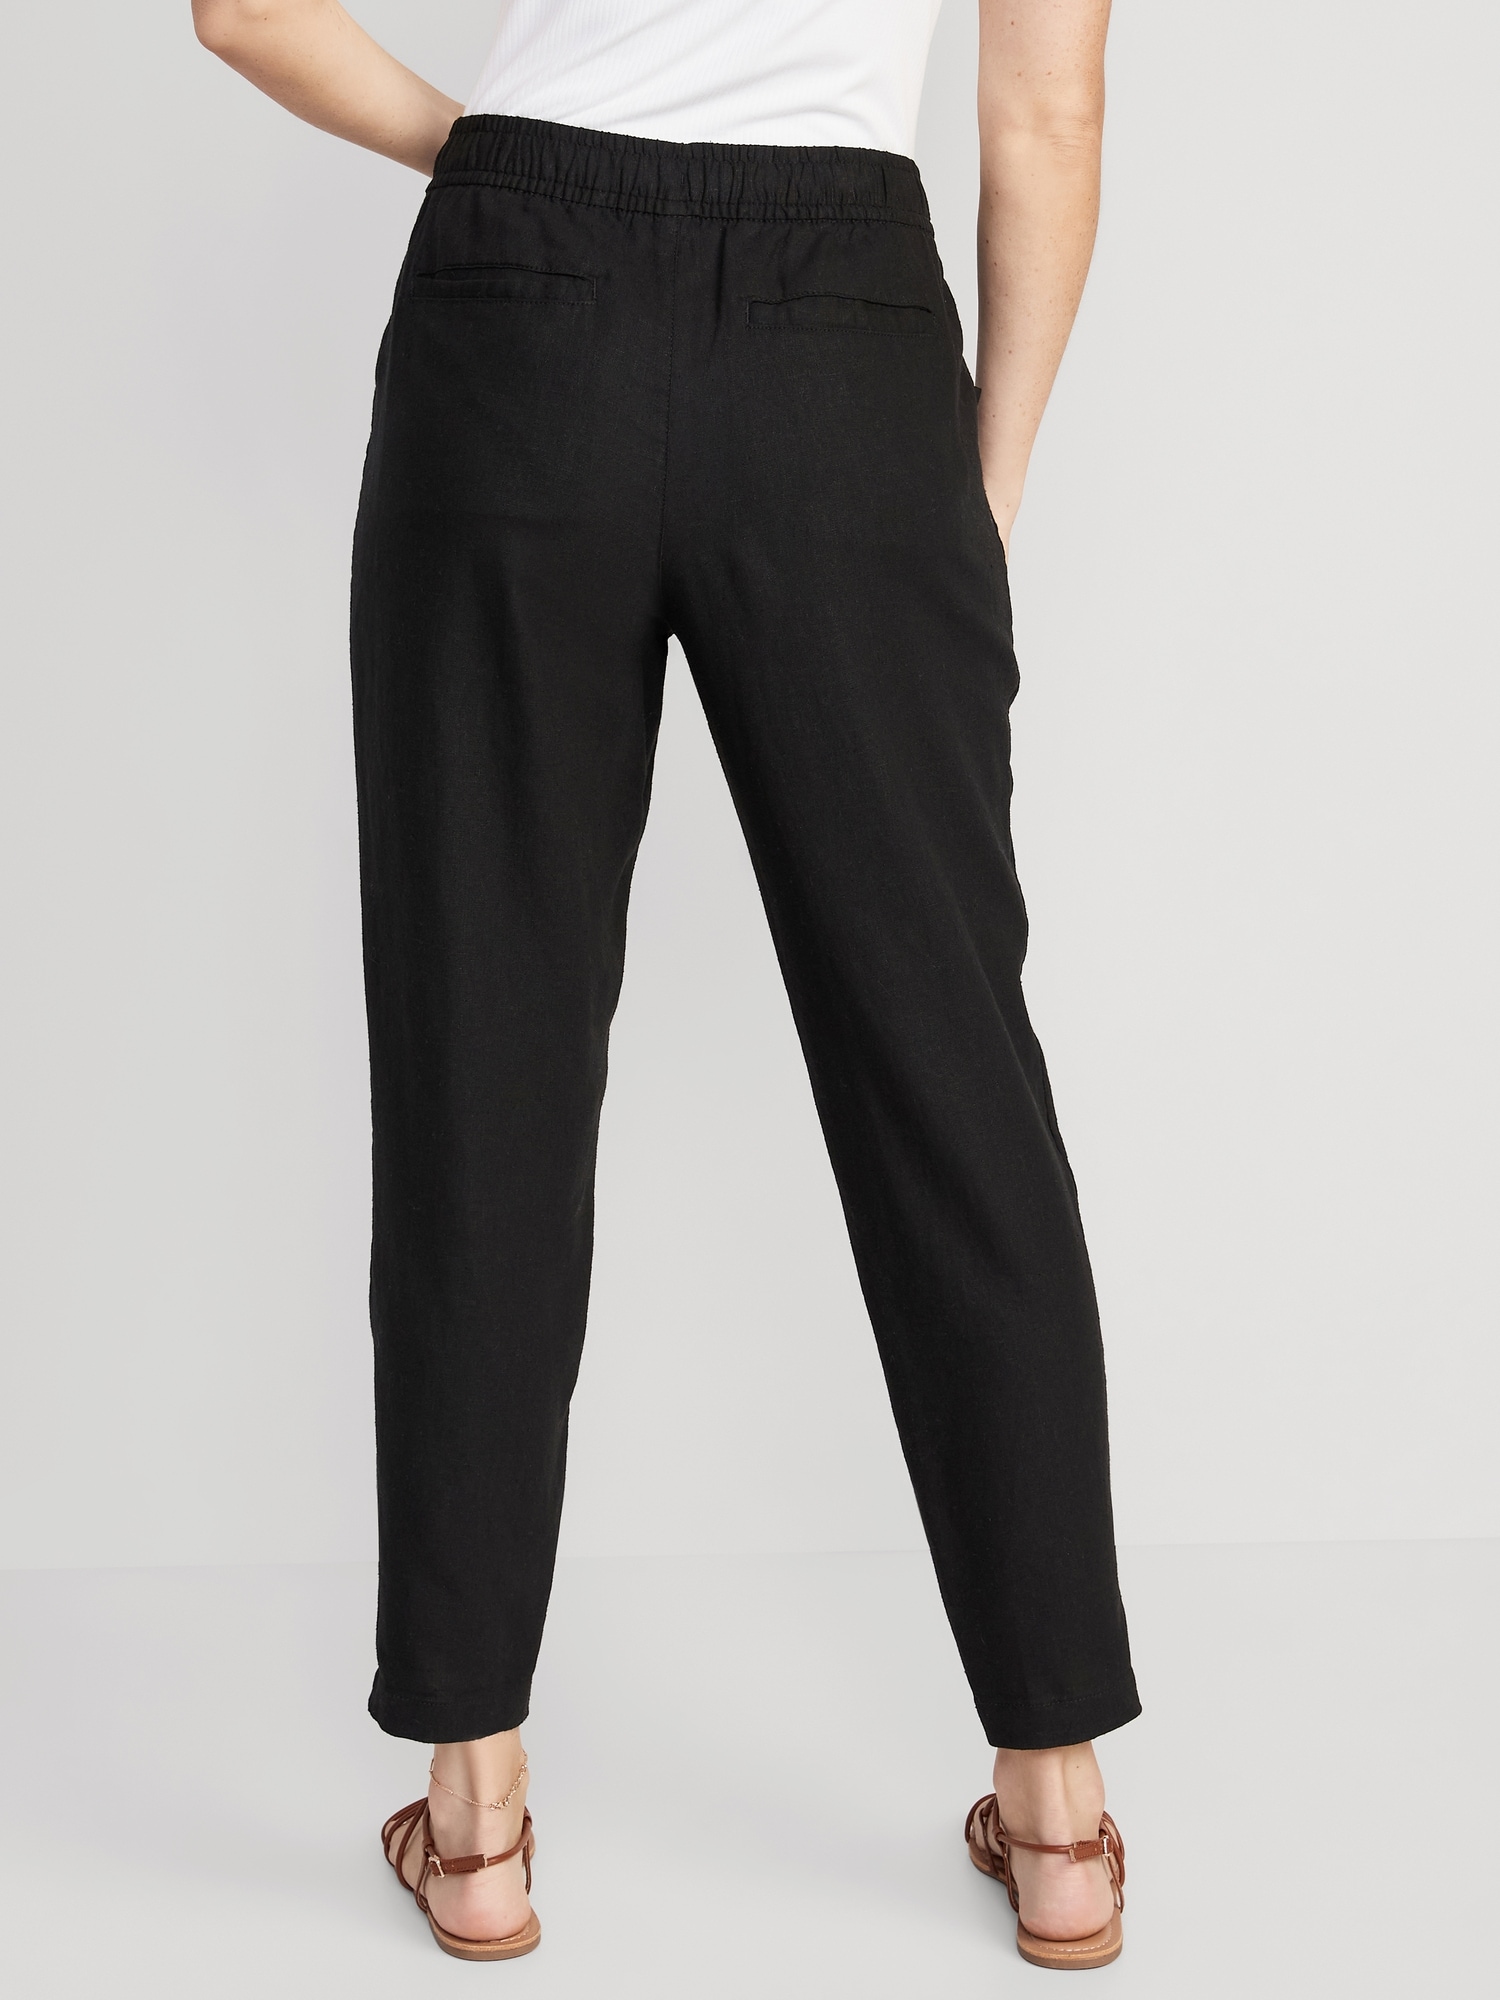 Black Linen Pants/ Preppy Pleated High waisted Tapered